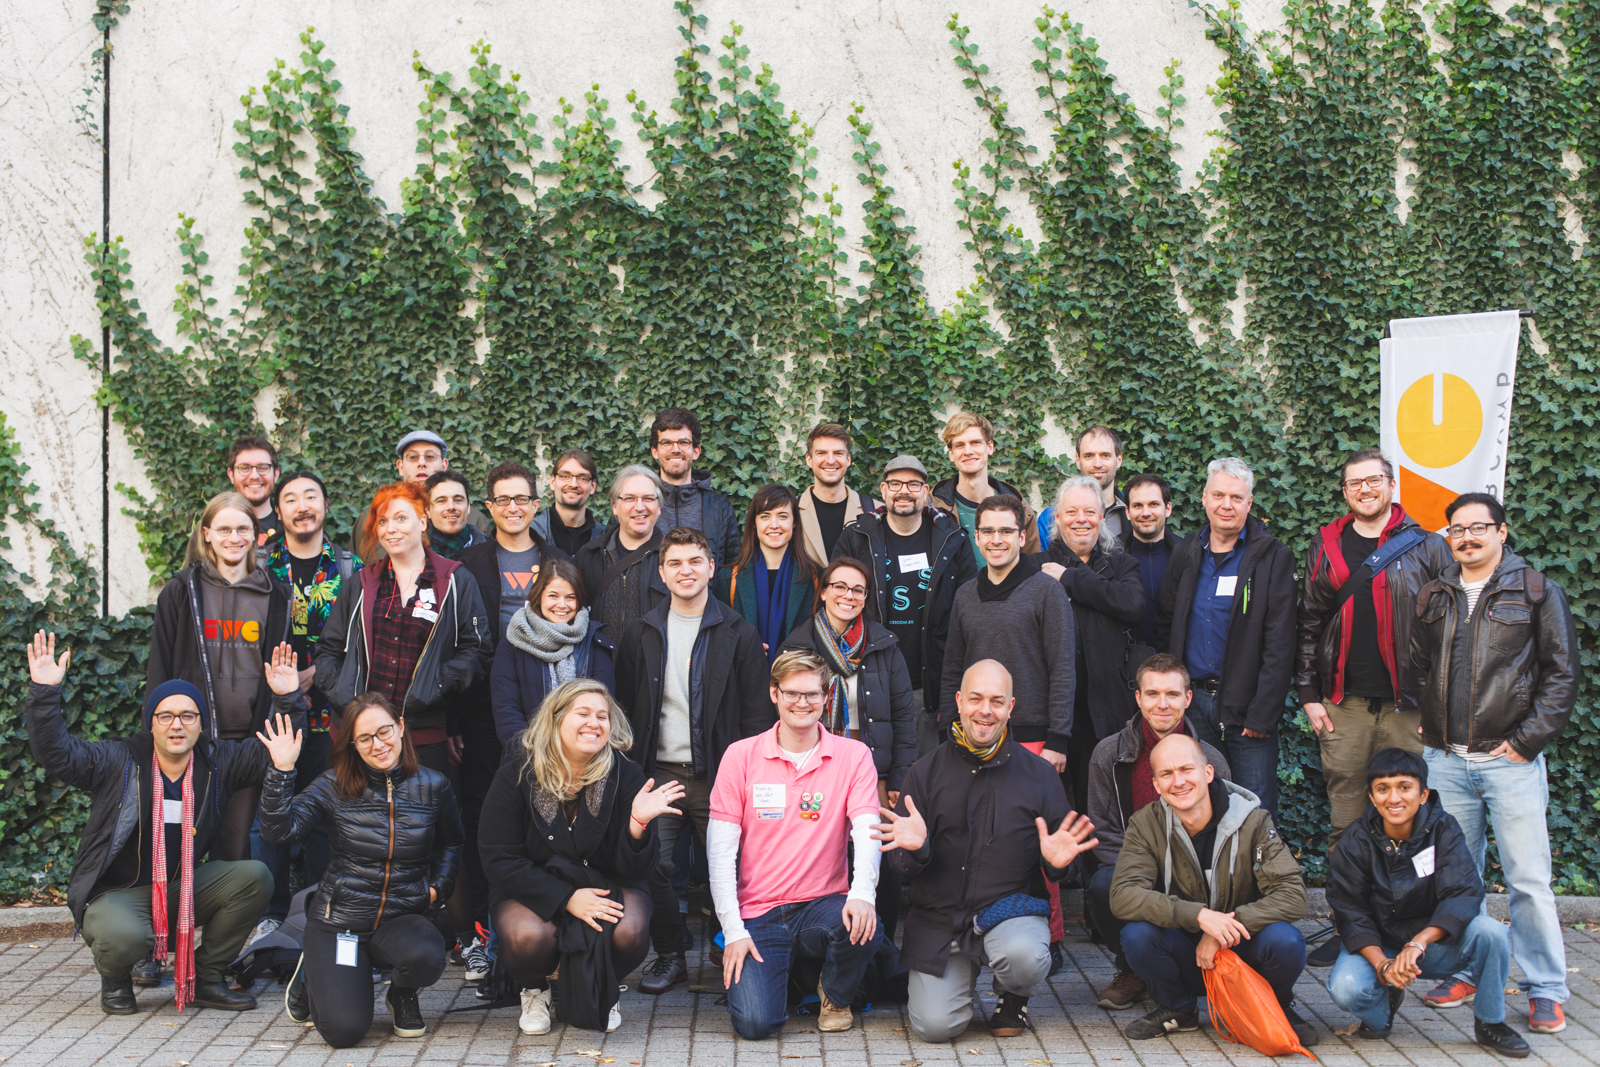 image: group photo from indiewebcamp berlin, not taken by me